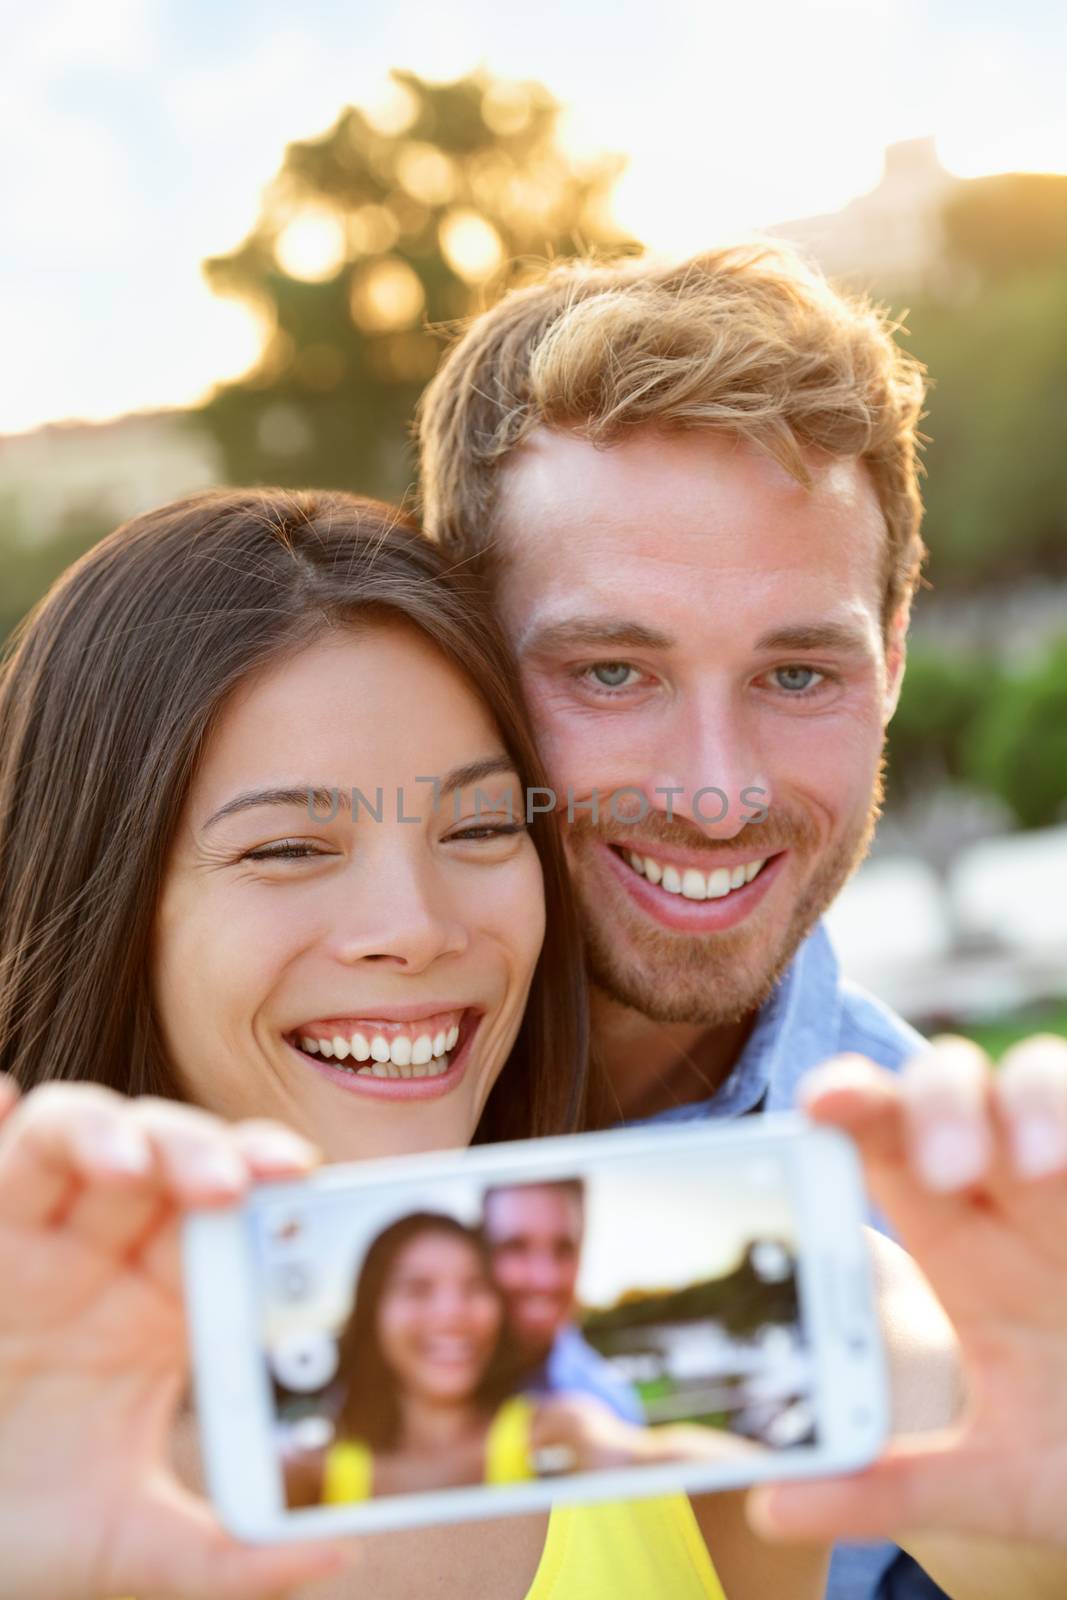 Couple in love taking selfie photo with smartphone. Romantic mixed race couple taking selfies pictures with smart phone camera having fun together outdoors in park. Asian girl, Caucasian guy.